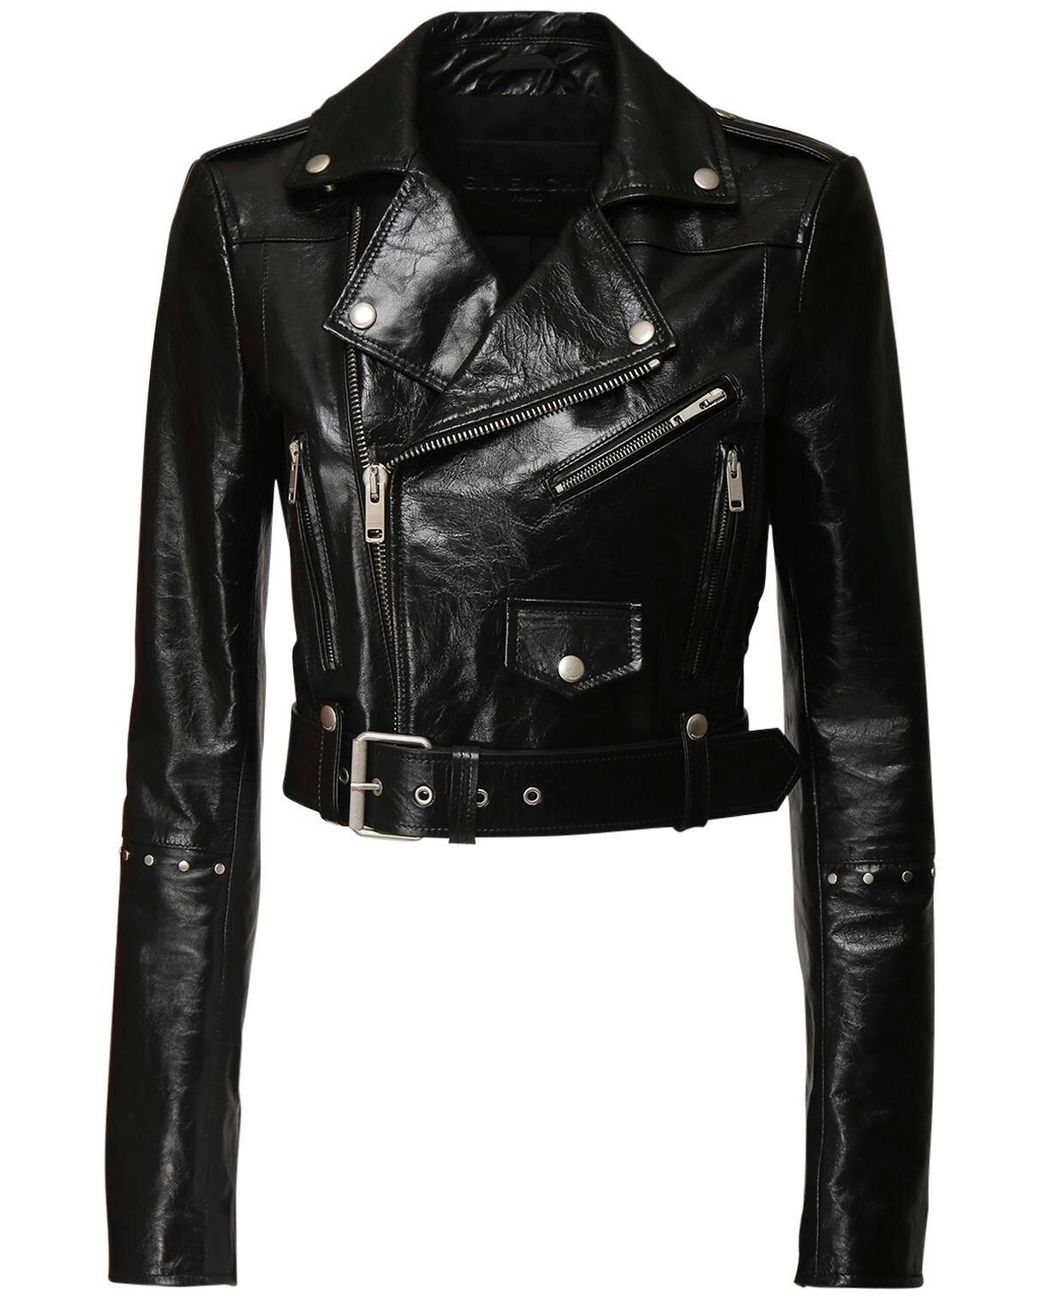 Givenchy Patent Leather Crop Biker Jacket in Black - Lyst